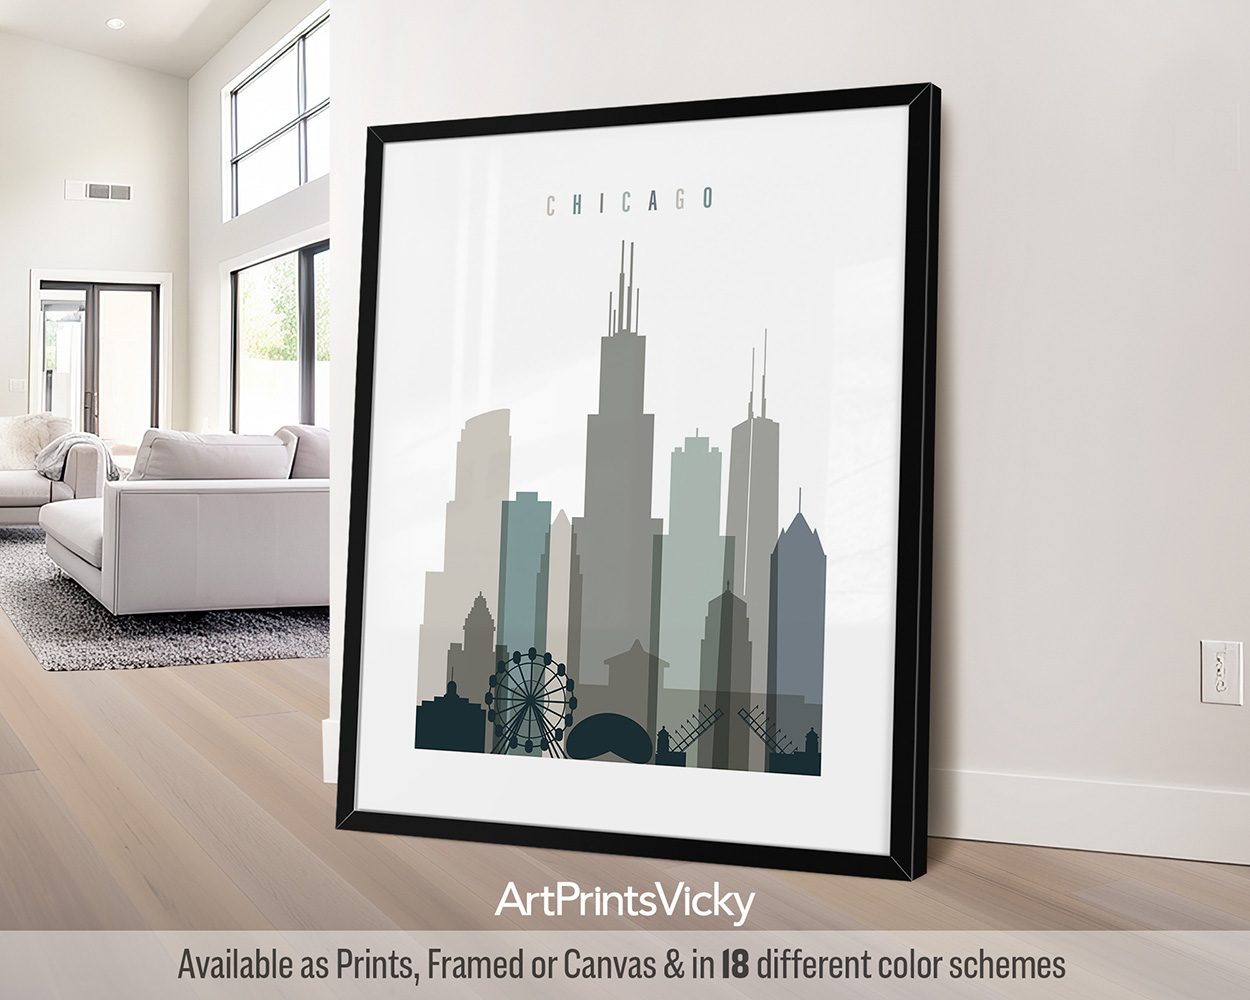 Chicago minimalist art print in cool Earth Tones 4. Features the Willis Tower, Cloud Gate, and the John Hancock Center by ArtPrintsVicky